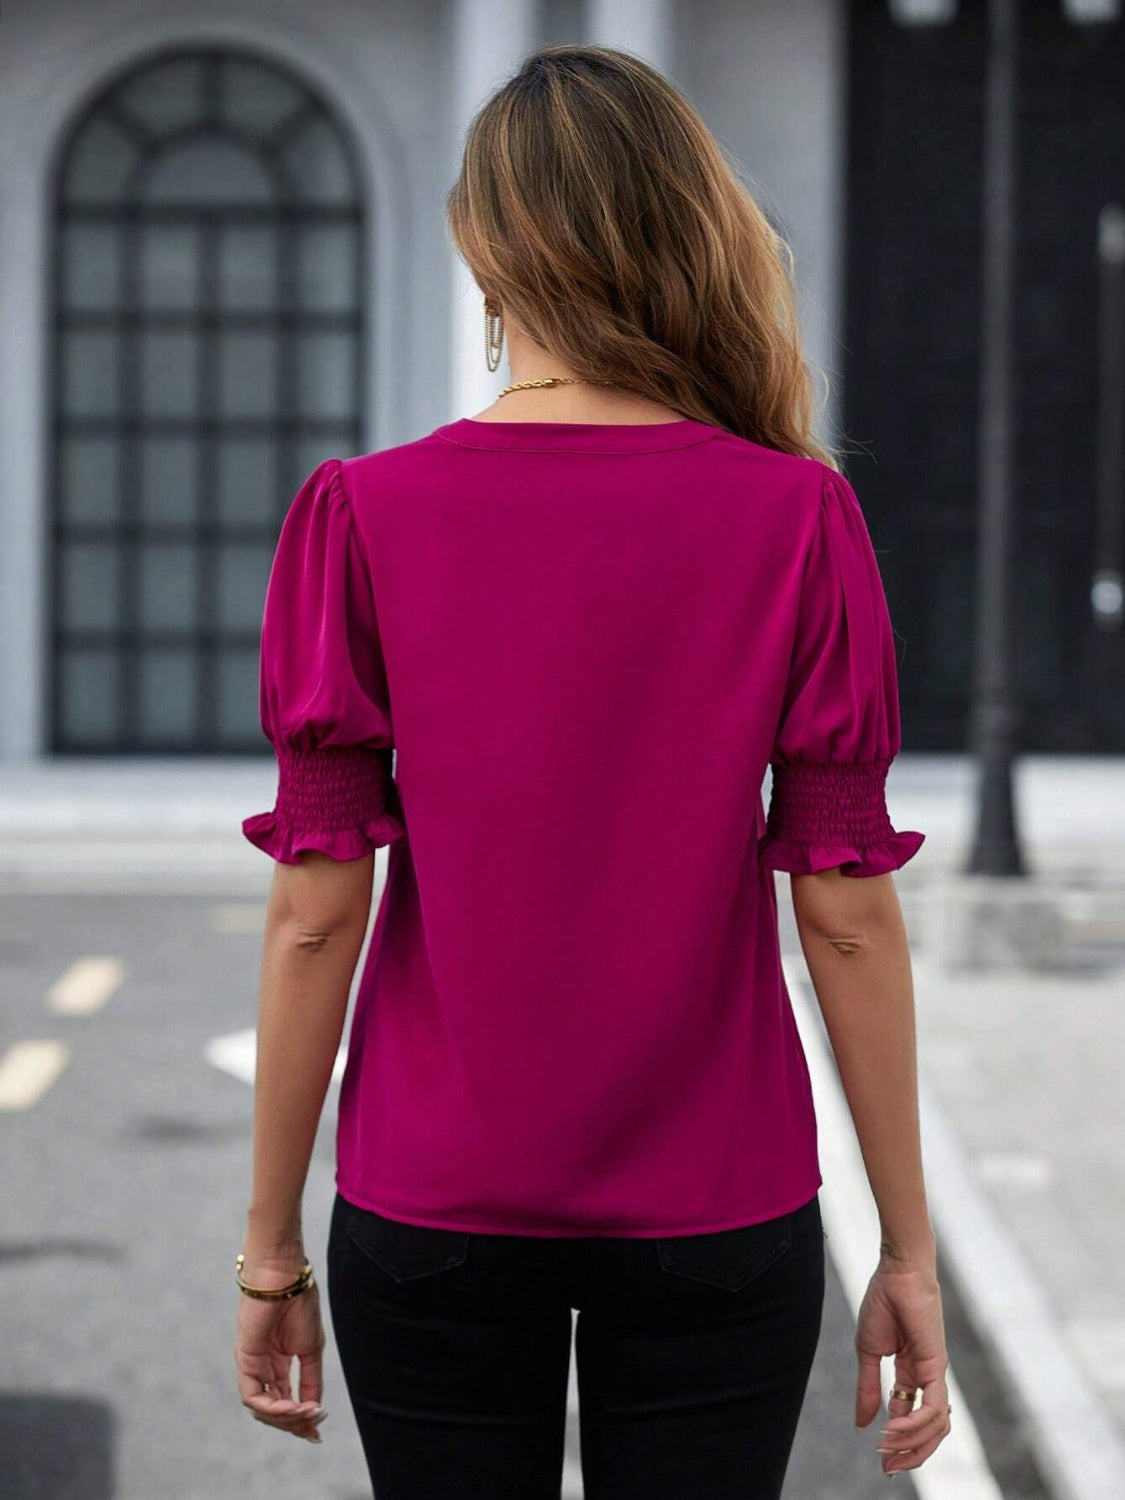 Vibrant magenta blouse with notched neckline and ruffled sleeve design